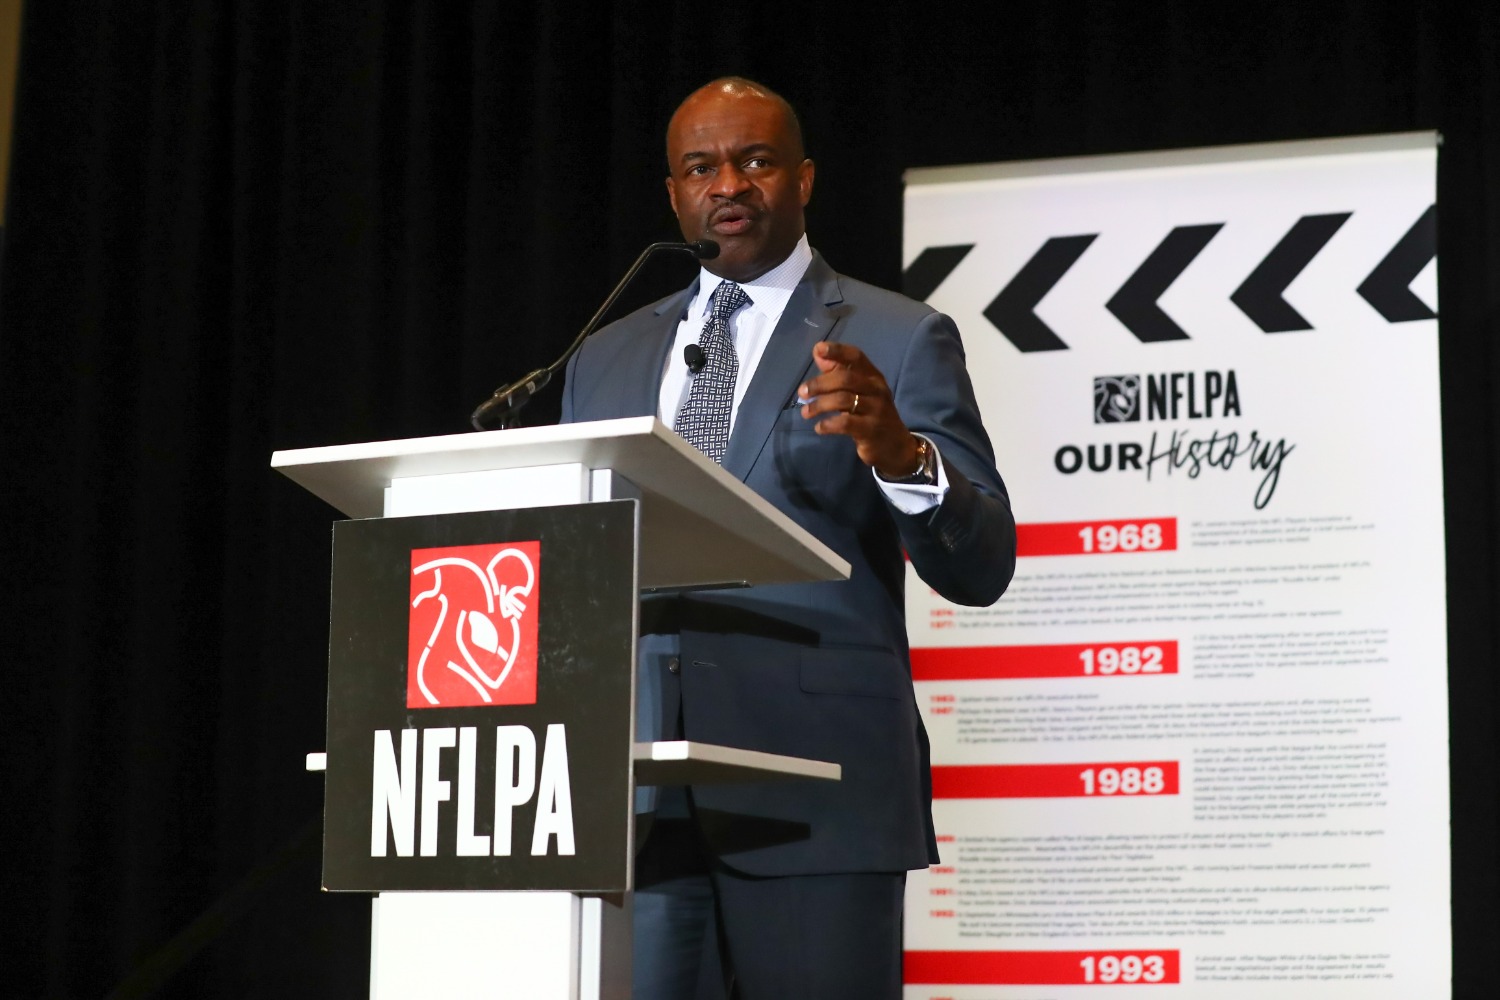 NFL fans scored a huge win against COVID-19 with the NFL and NFLPA agreeing to changes that ensure the 2020 NFL season will take place.